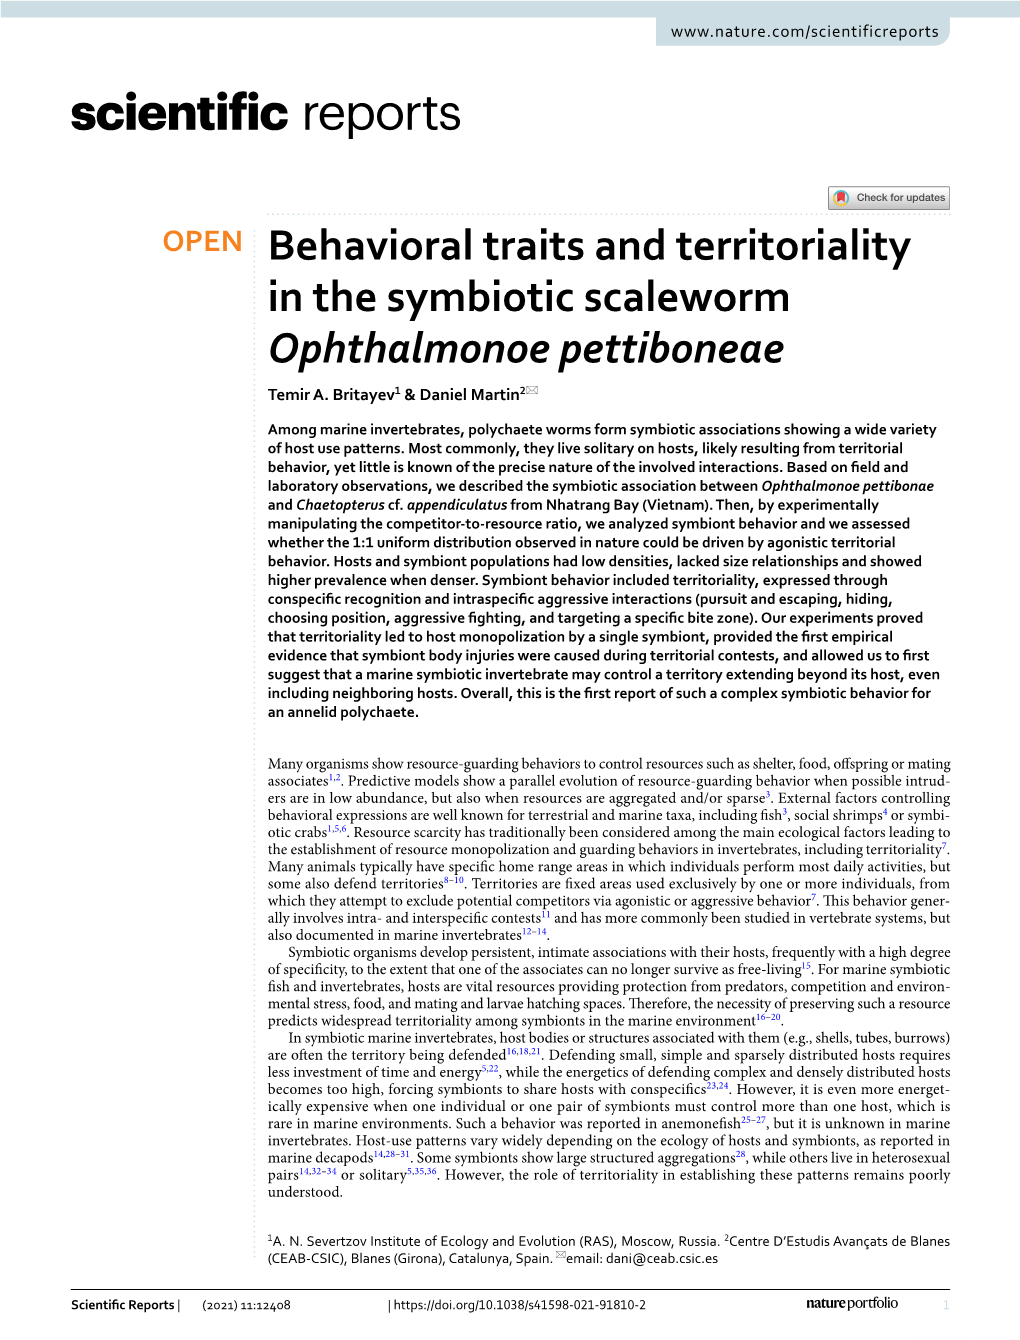 Behavioral Traits and Territoriality in the Symbiotic Scaleworm Ophthalmonoe Pettiboneae Temir A